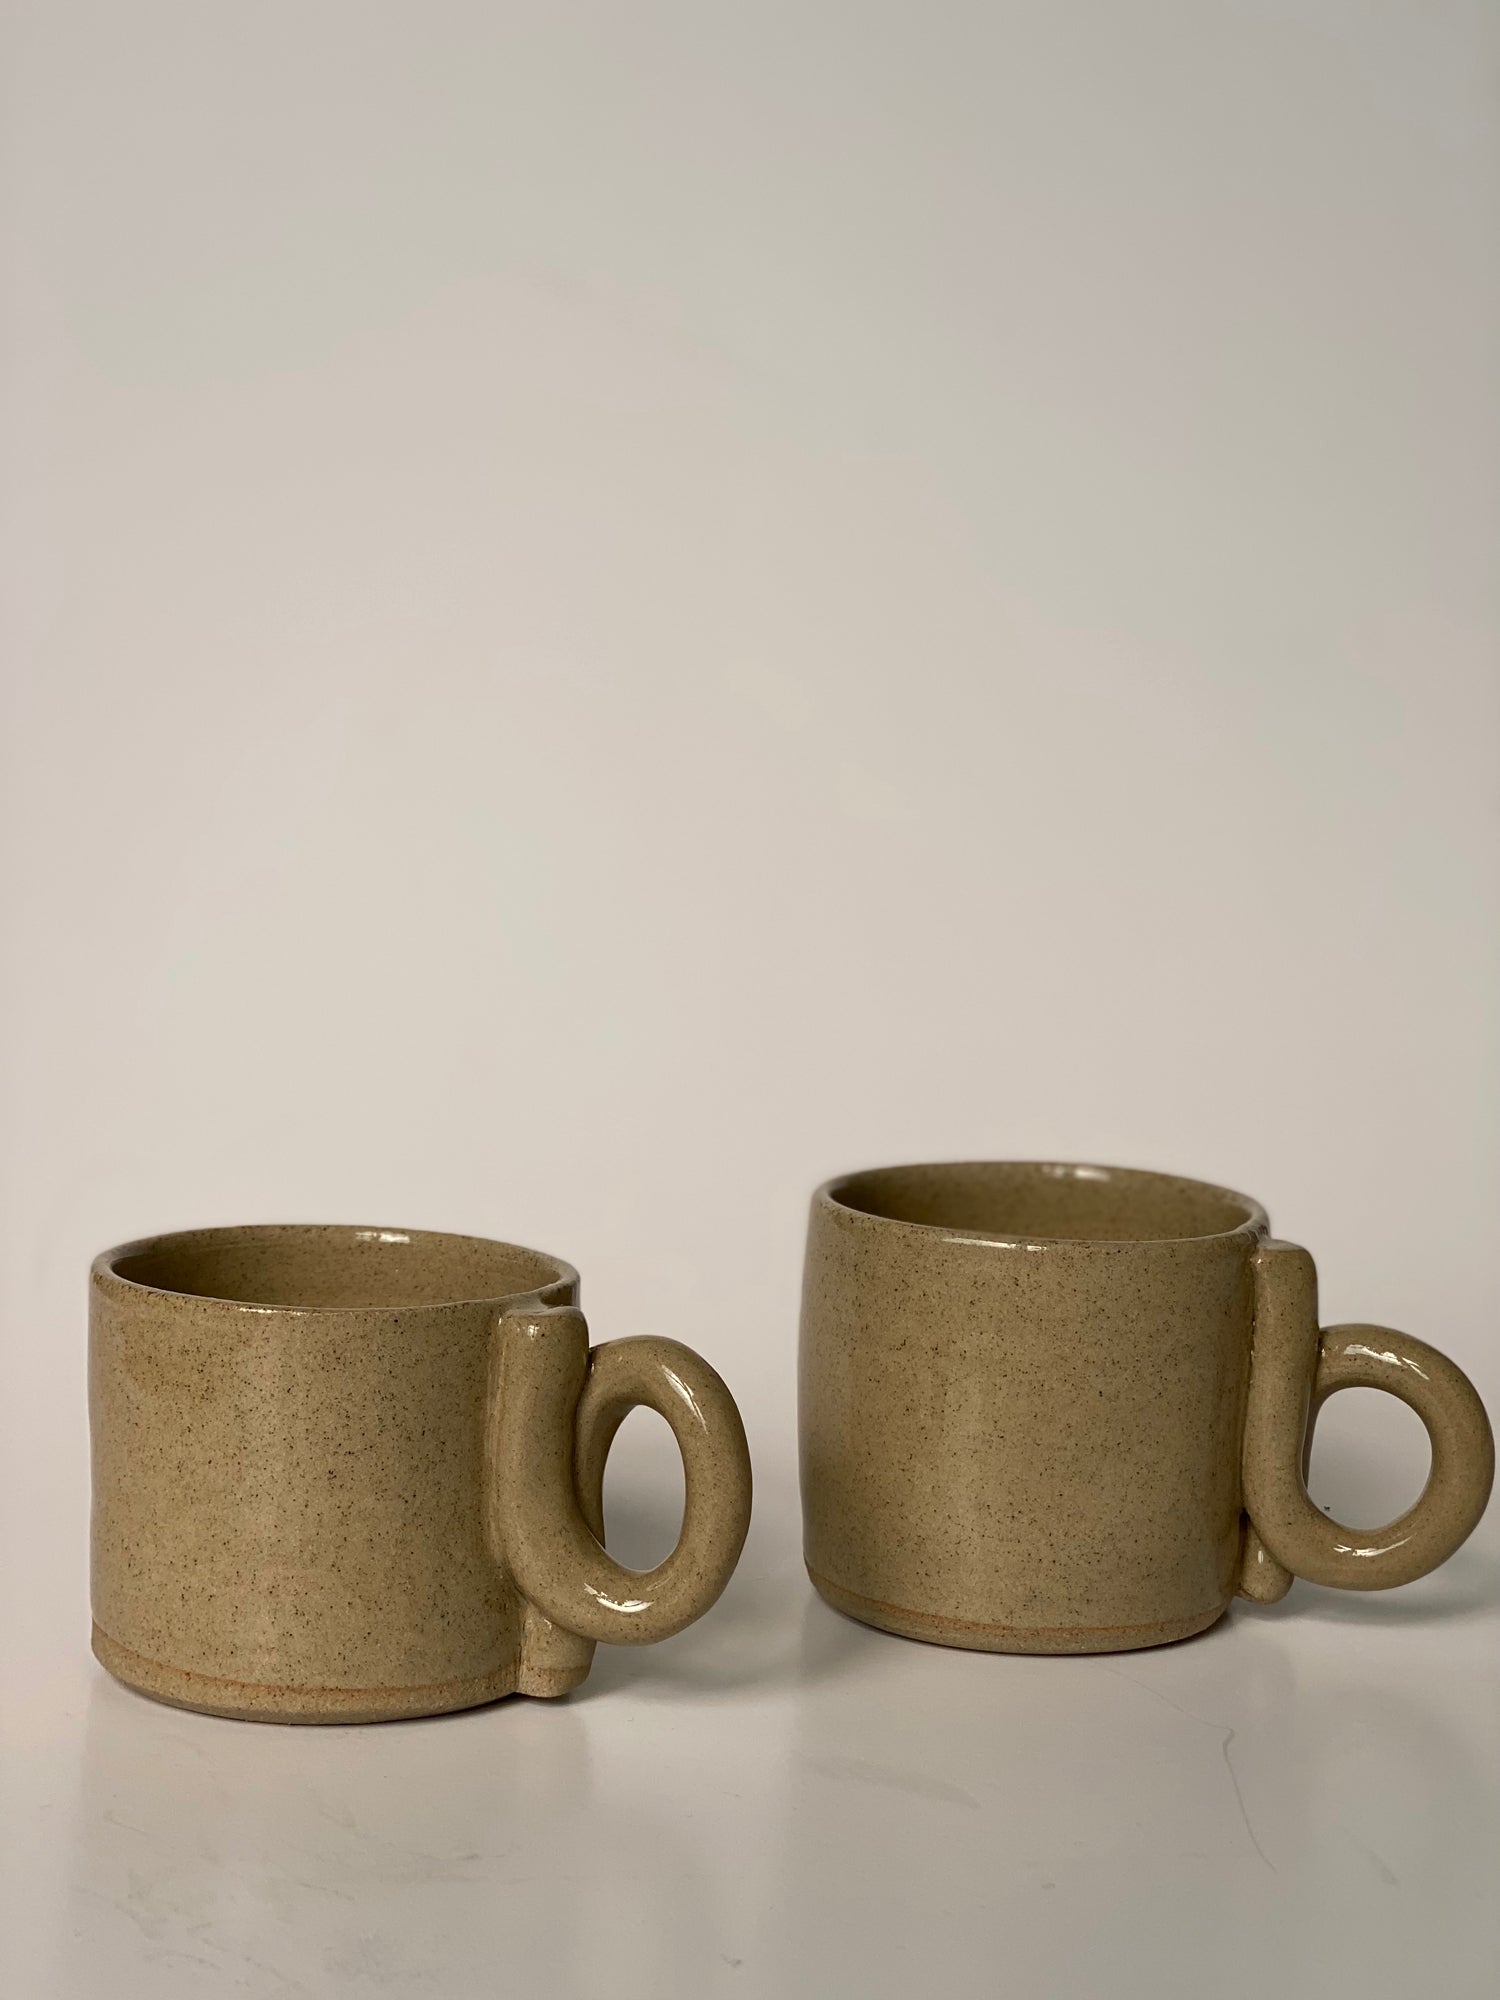 his + hers + theirs mug